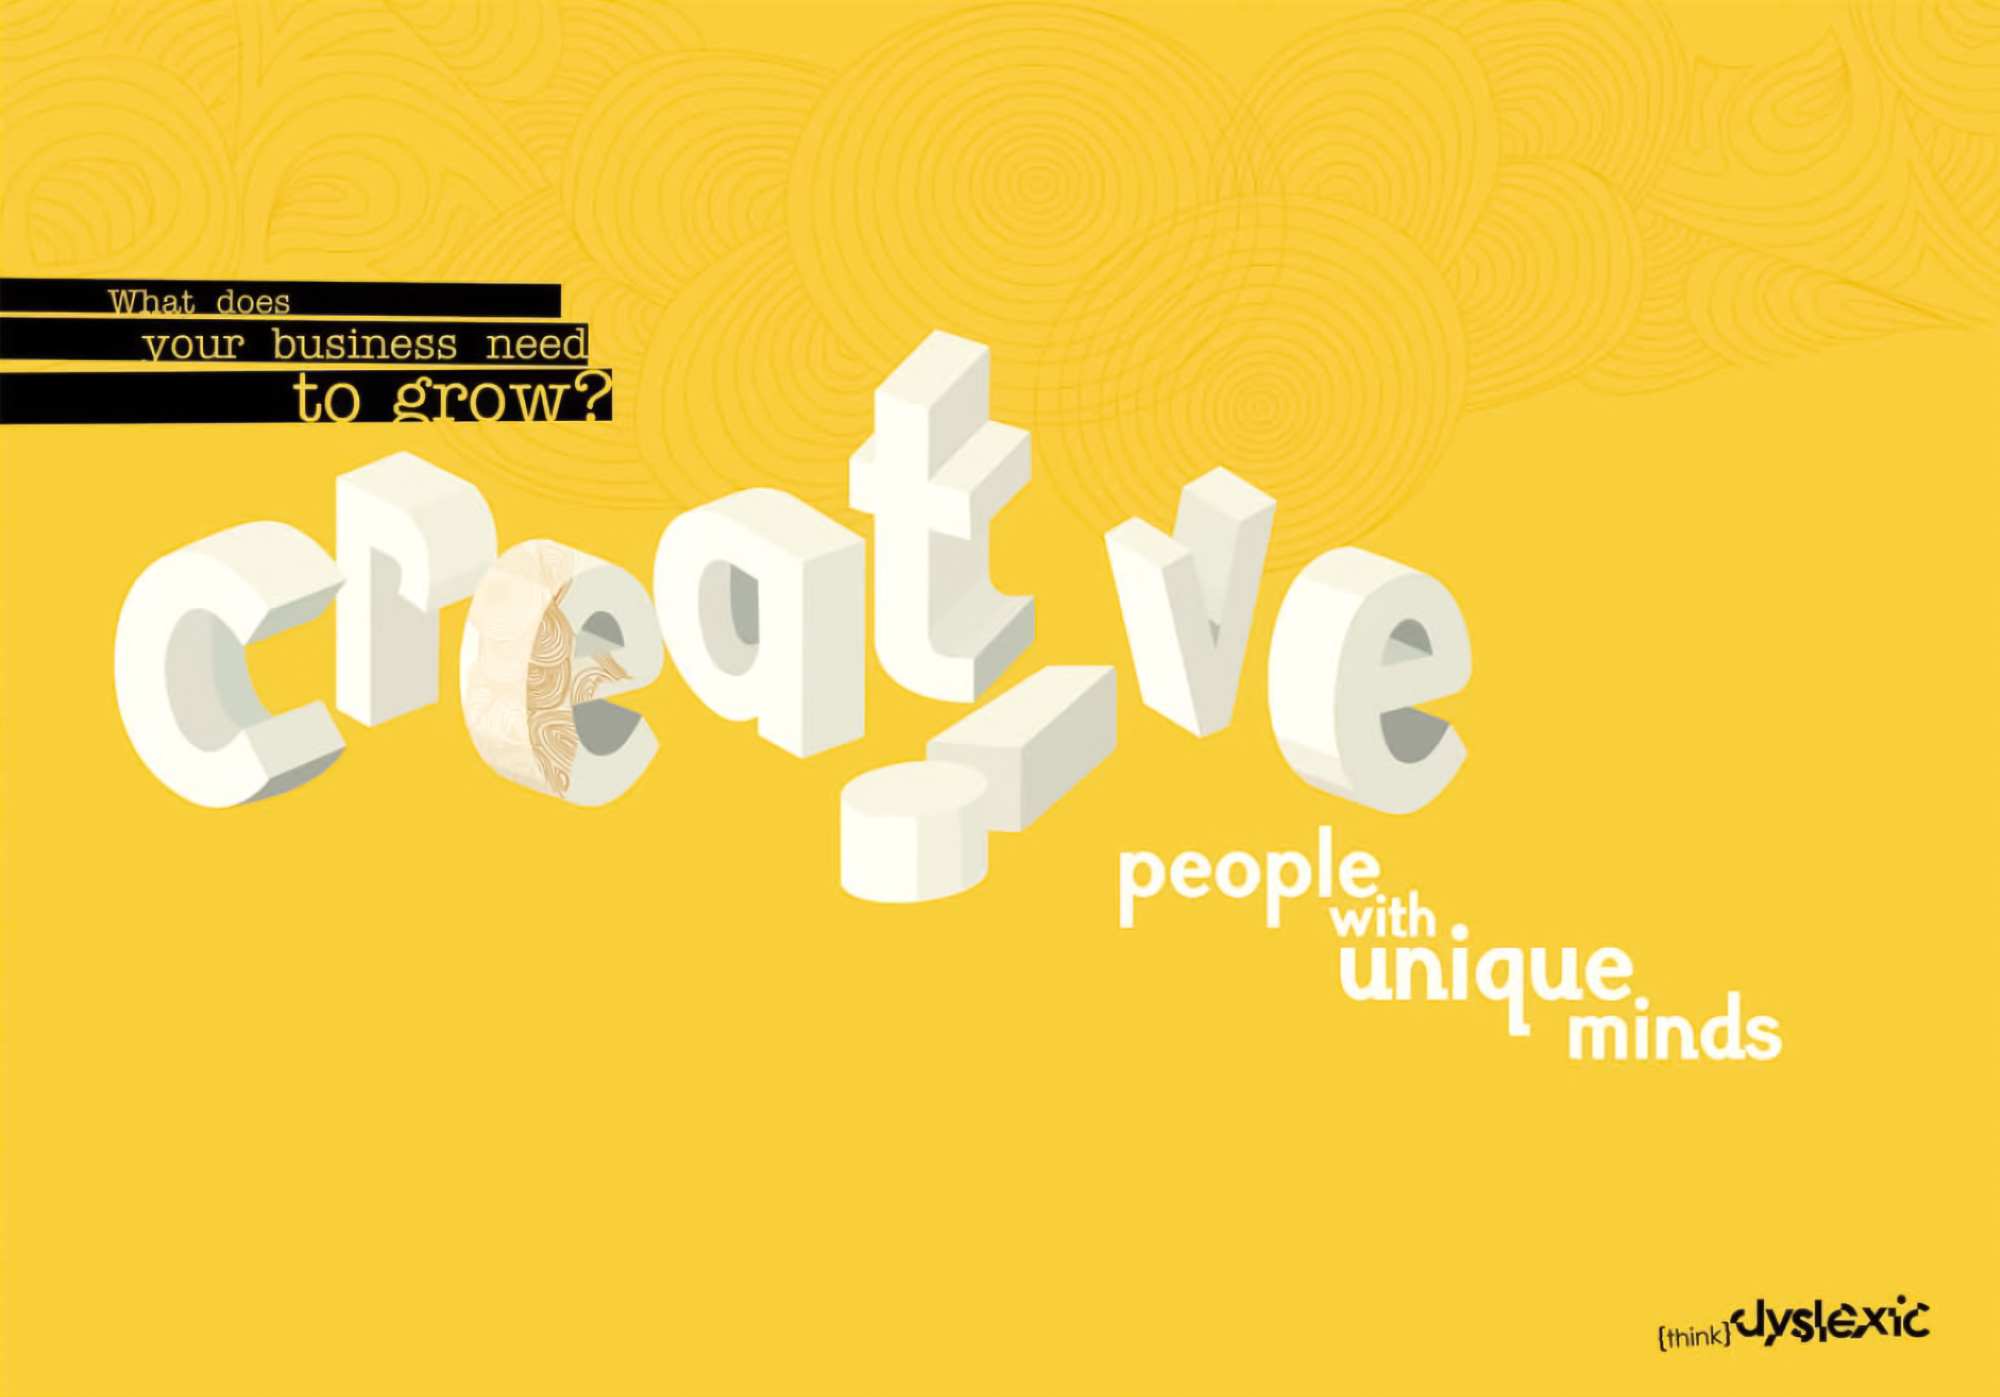 Yellow dyslexia campaign, has the words in large 3D text saying ‘creative people with unique minds’